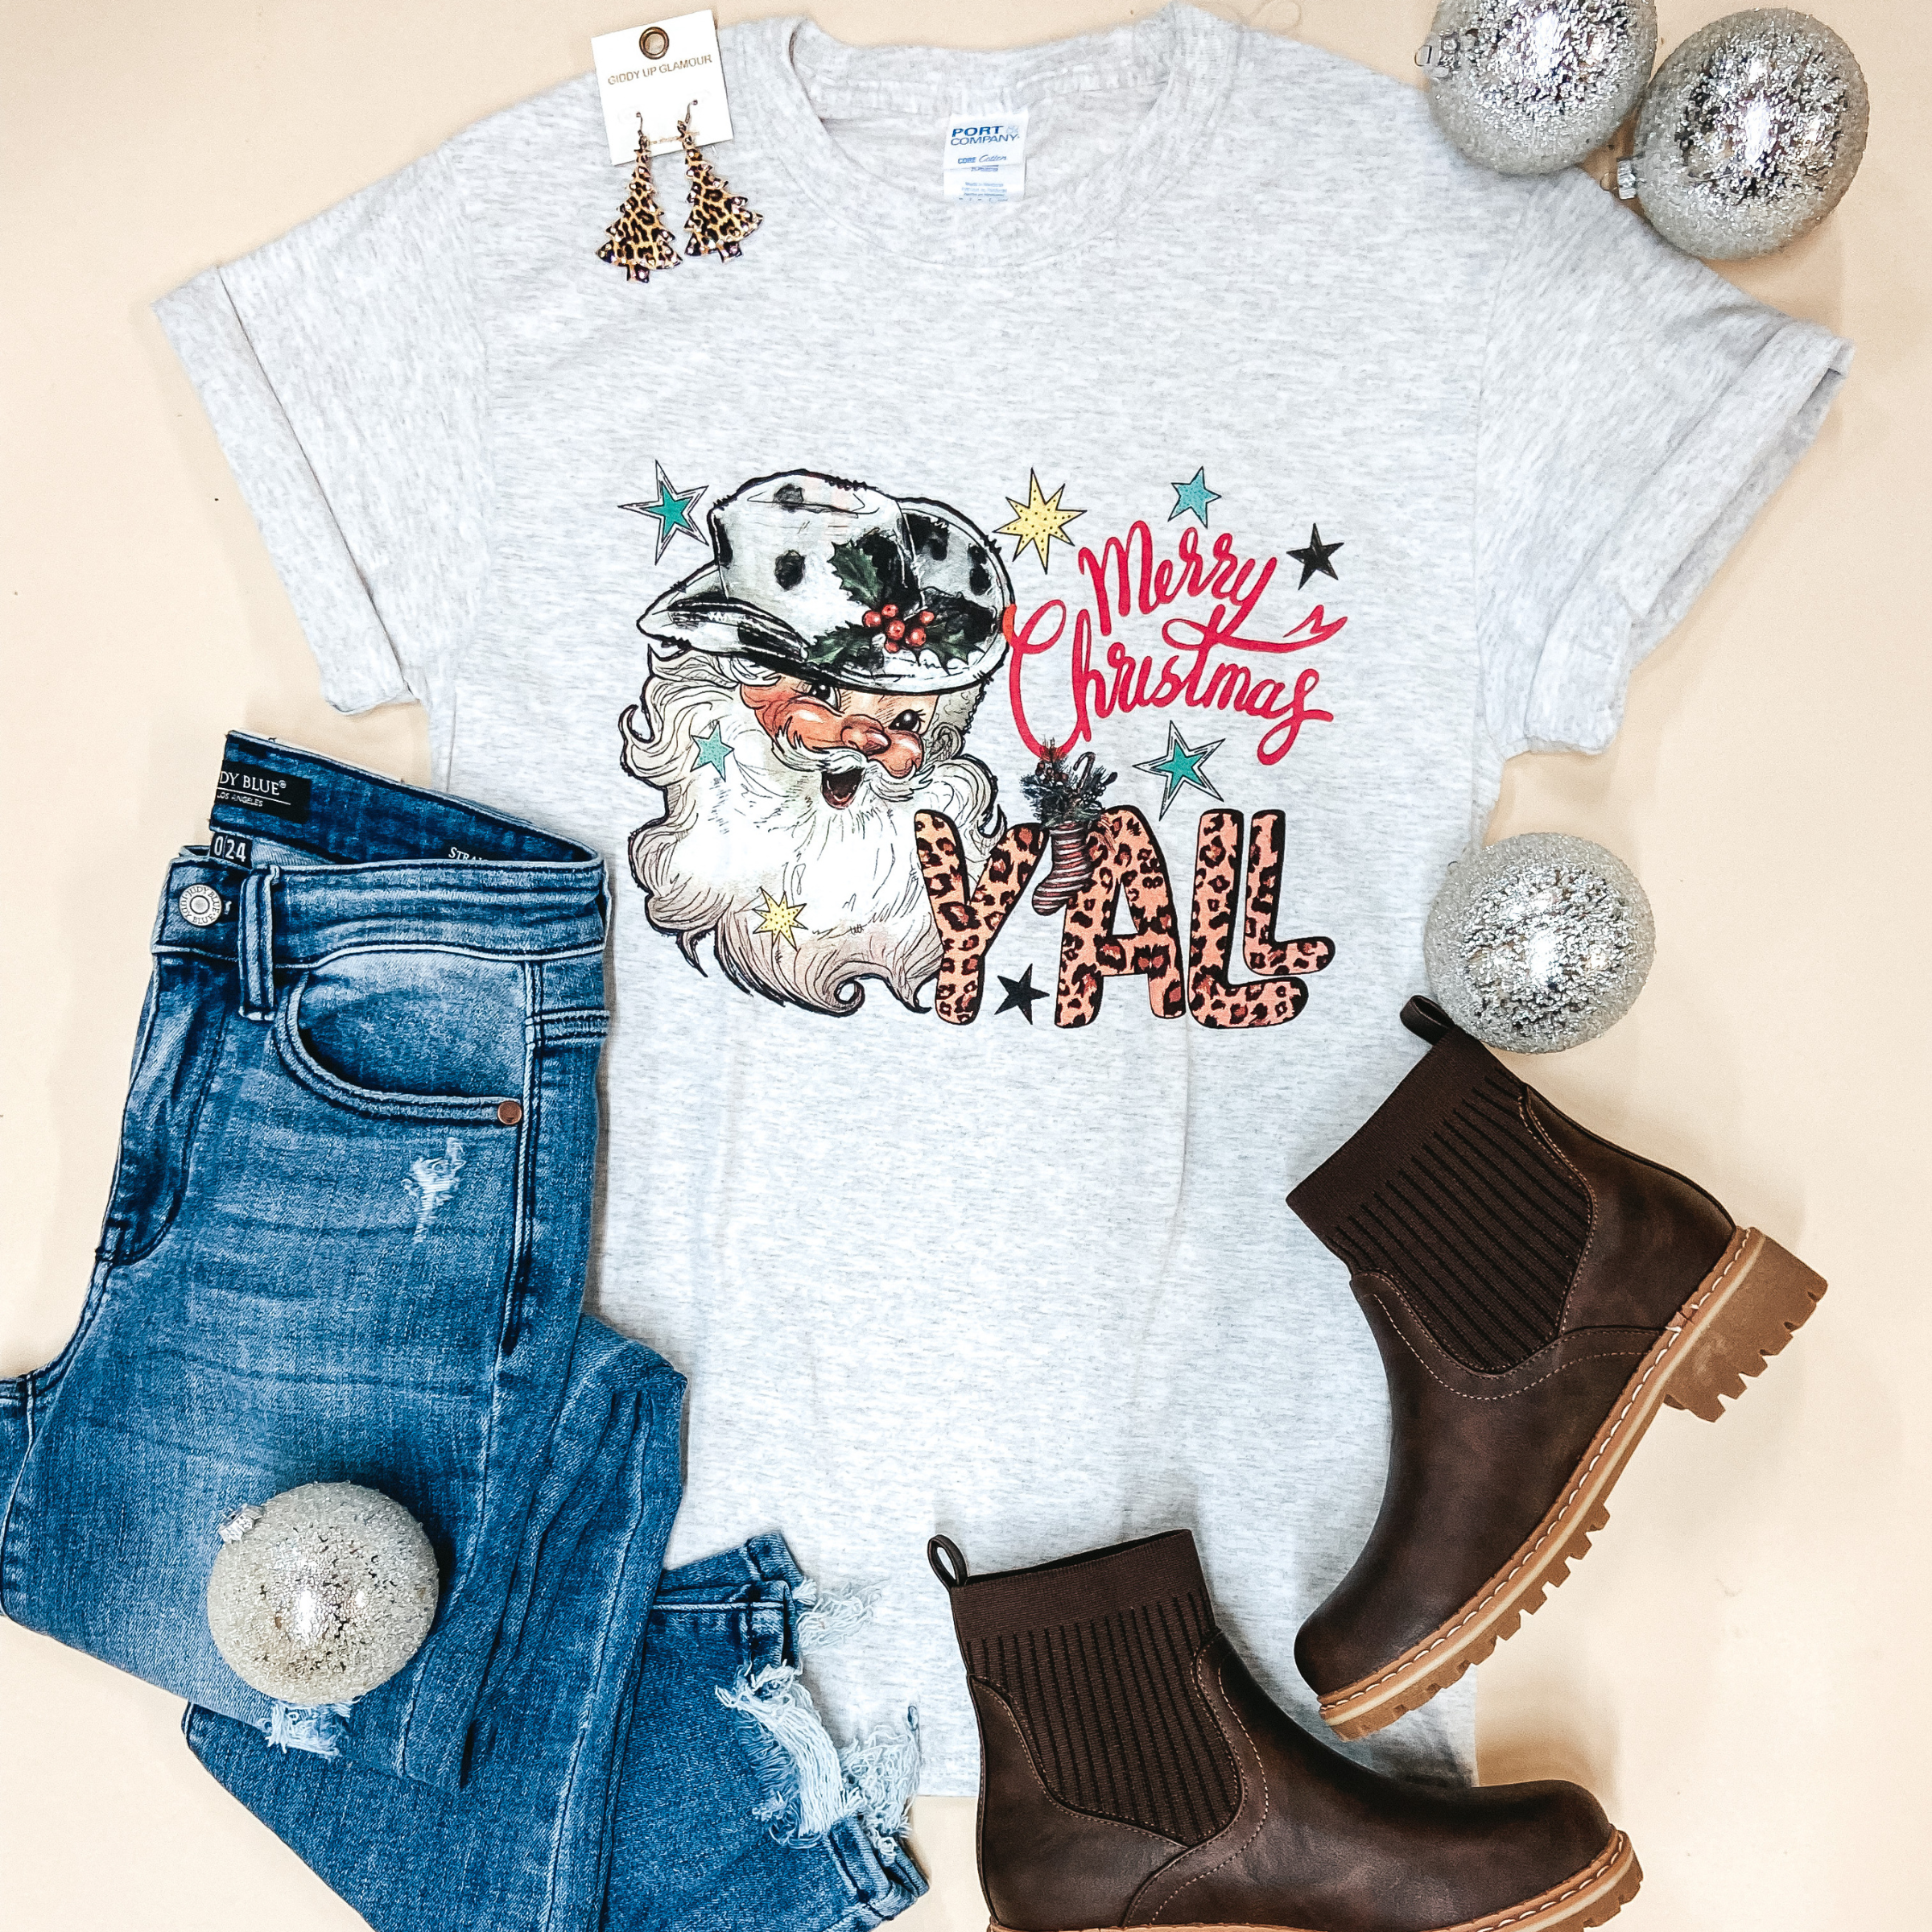 A grey short sleeve graphic tee with a crew neckline and Western Santa Clause graphic that says "Merry Christmas Y'all." Pictured on a white background with distressed jeans, brown booties, and leopard print Christmas Tree earrings.